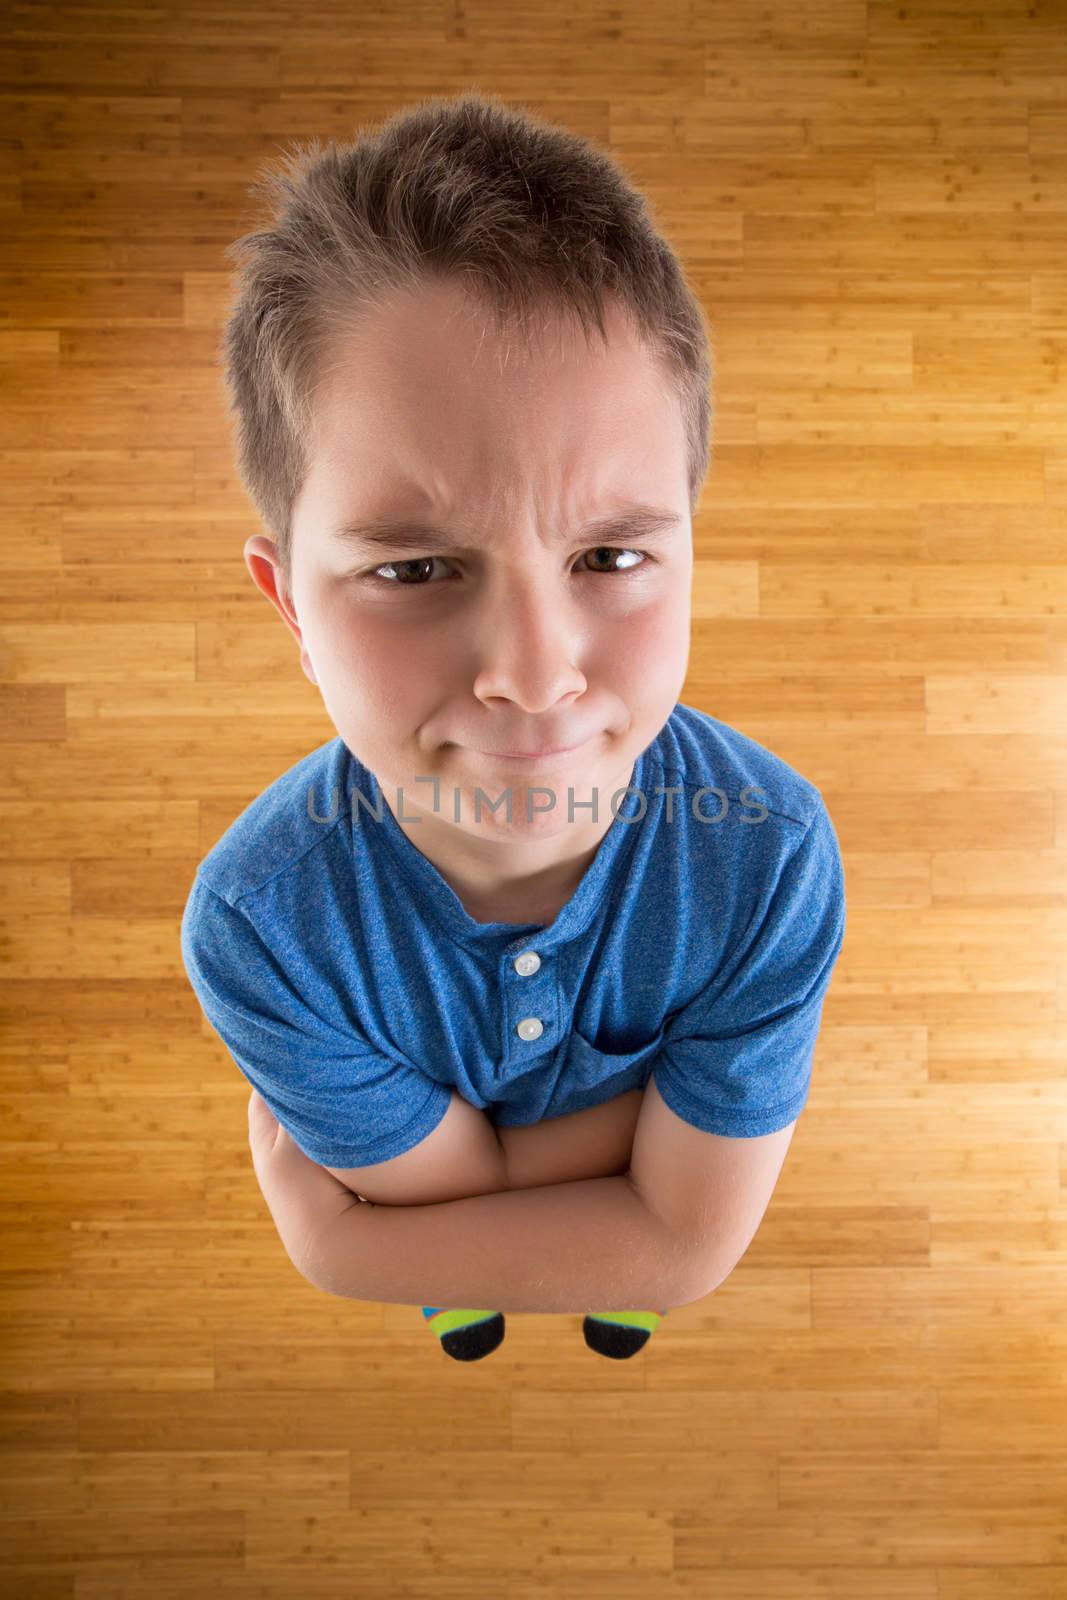 Cute Young Boy Demanding What he Wants While Looking at the Camera from High Angle View with Arms Crossing Over his Chest.